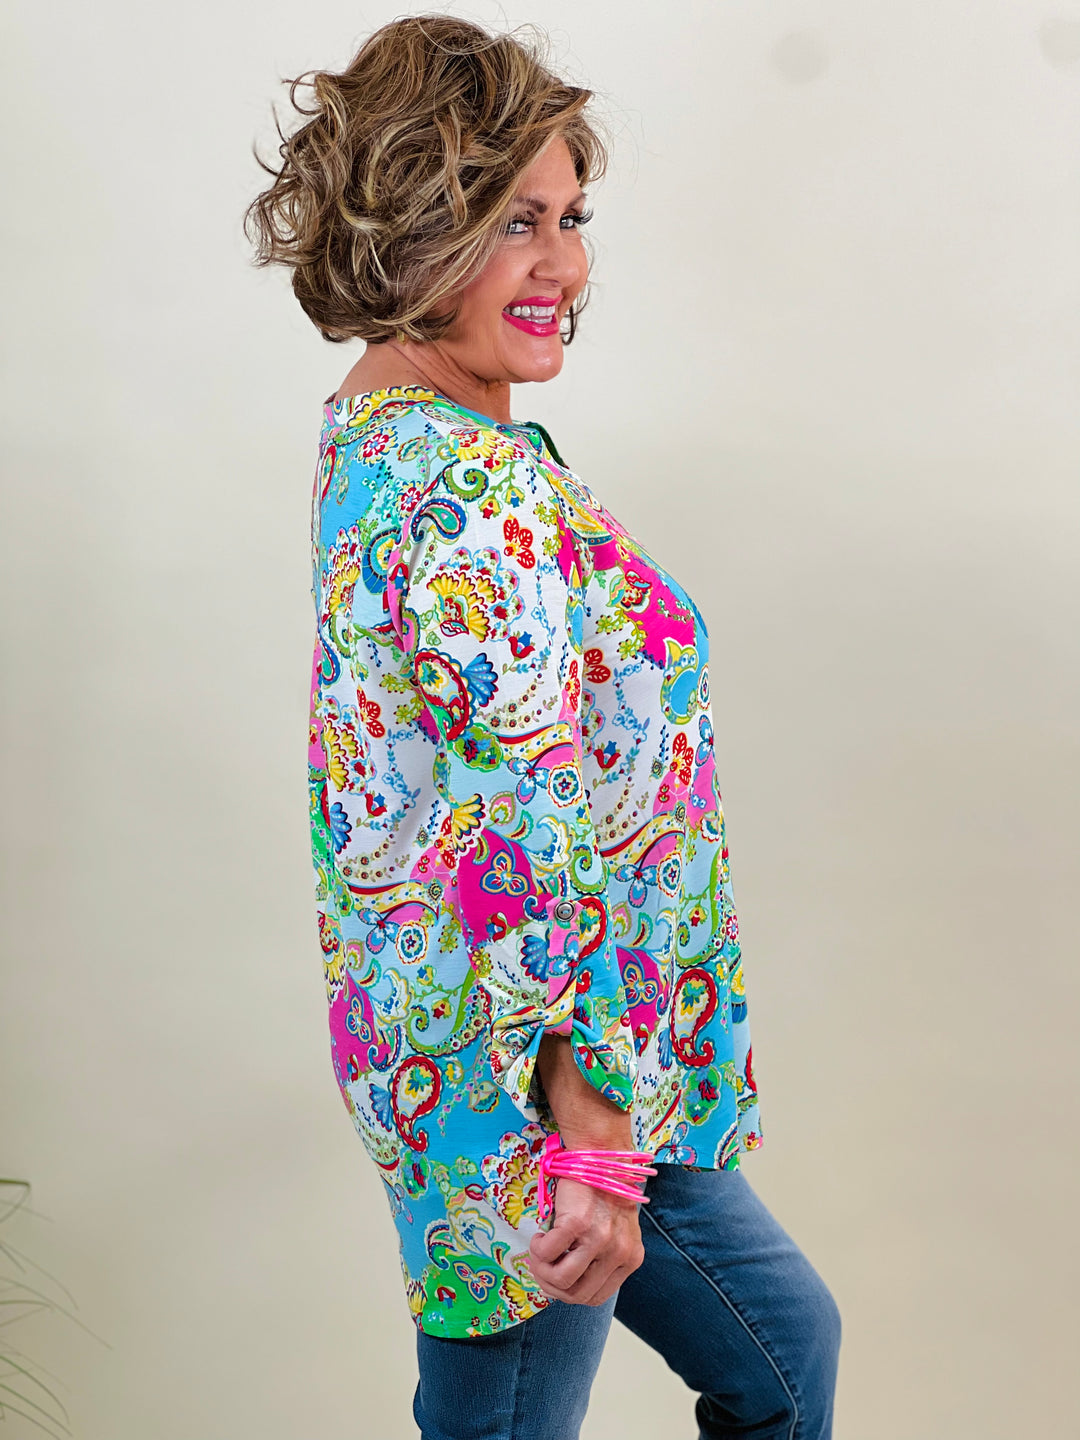 RESTOCKED: Green Paisley Top w/ 3/4 Sleeve - Available S - Extended Sizes